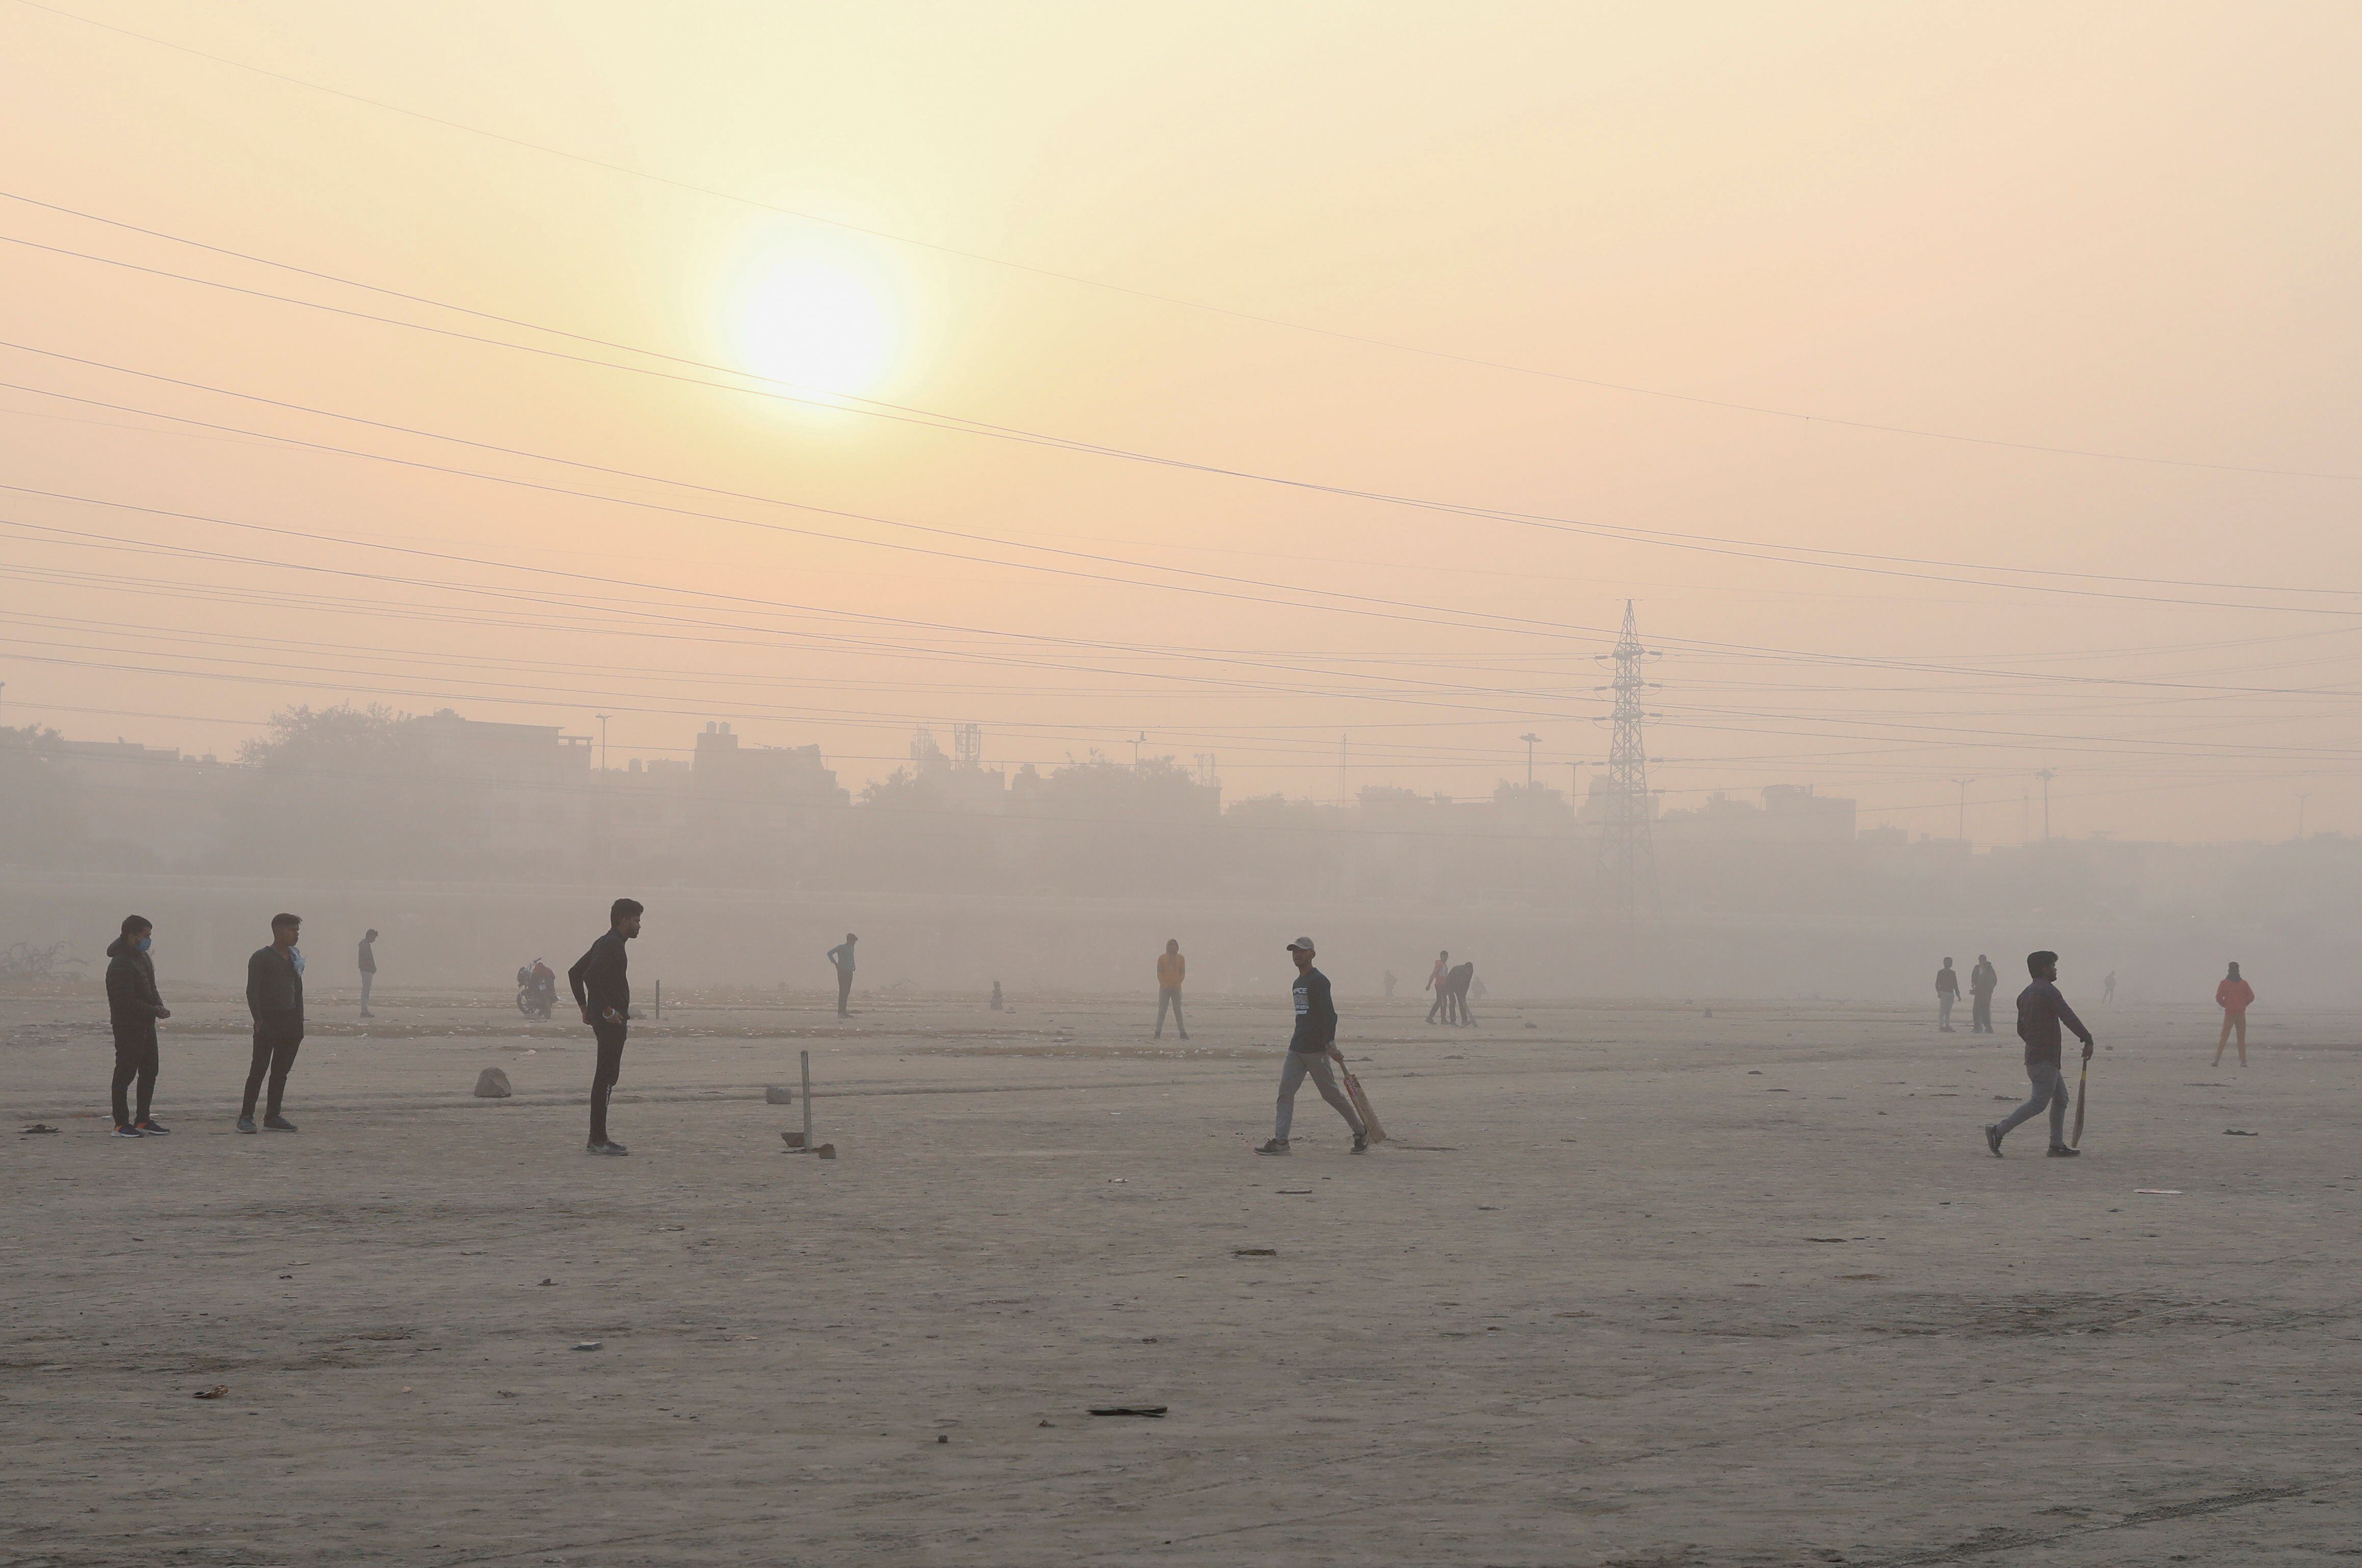 People play cricket on the floodplains of the Yamuna River on a foggy morning in New Delhi, India, on November 17, 2021. REUTERS / Anushree Fadnavis